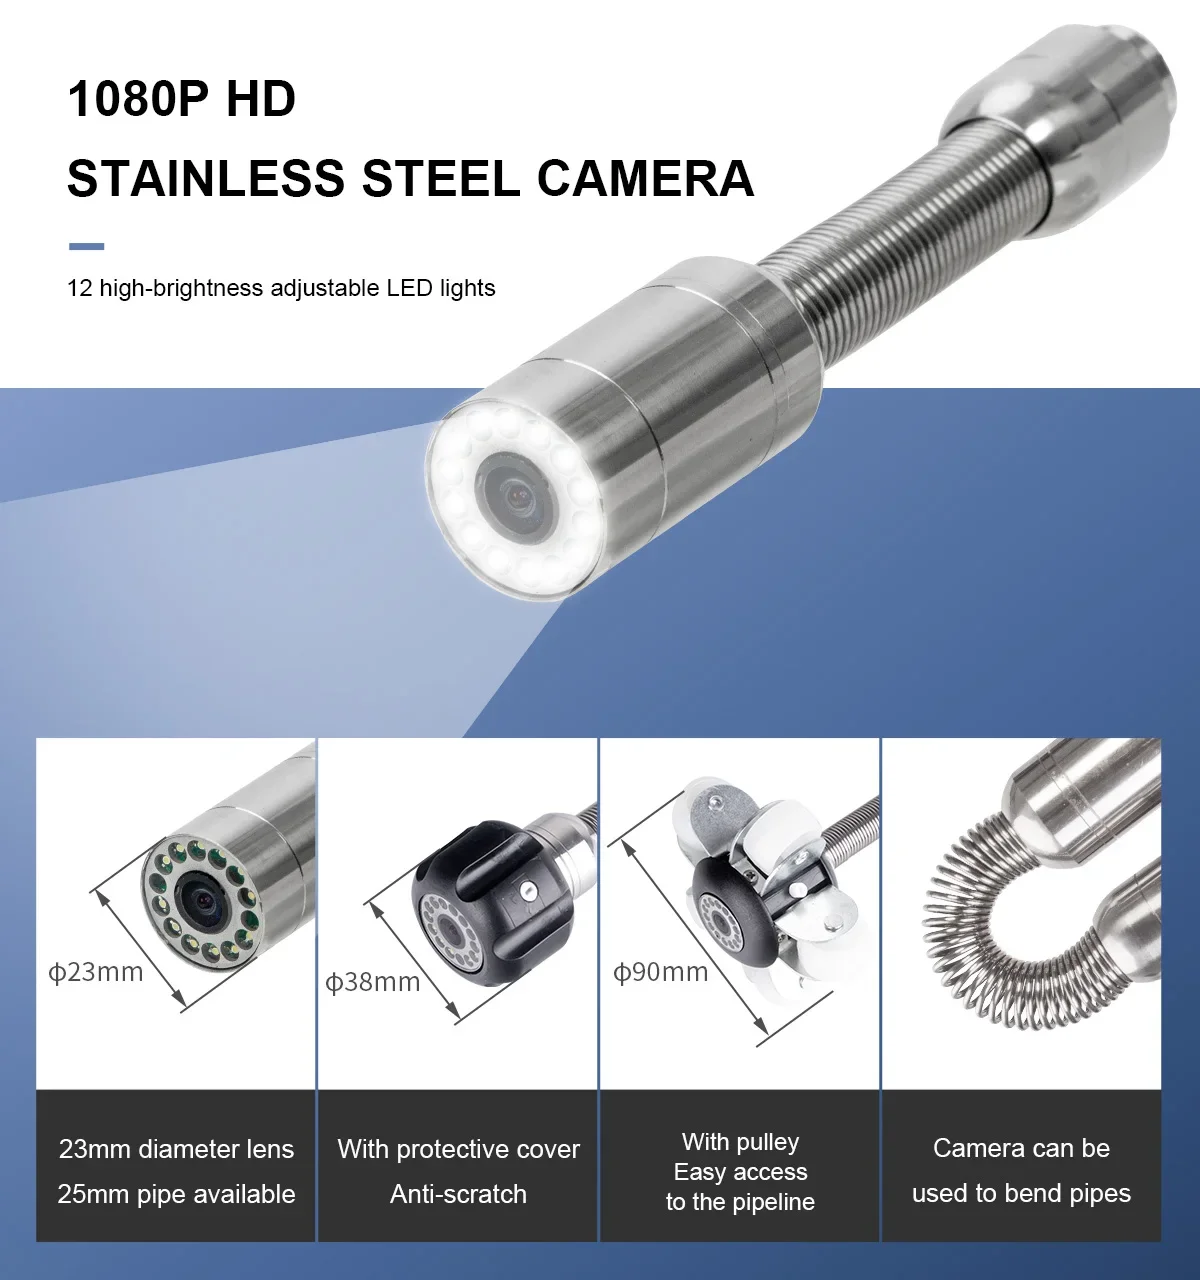 HD Well Pipe Inspection Video Camera Head Drain Sewer Pipeline Industrial Endoscope Accessories Deep Down Hole Detection 40mm 80mm abs skid for 23mm camera head inspection video drain pipe sewer industrial endoscope protective bracket timook